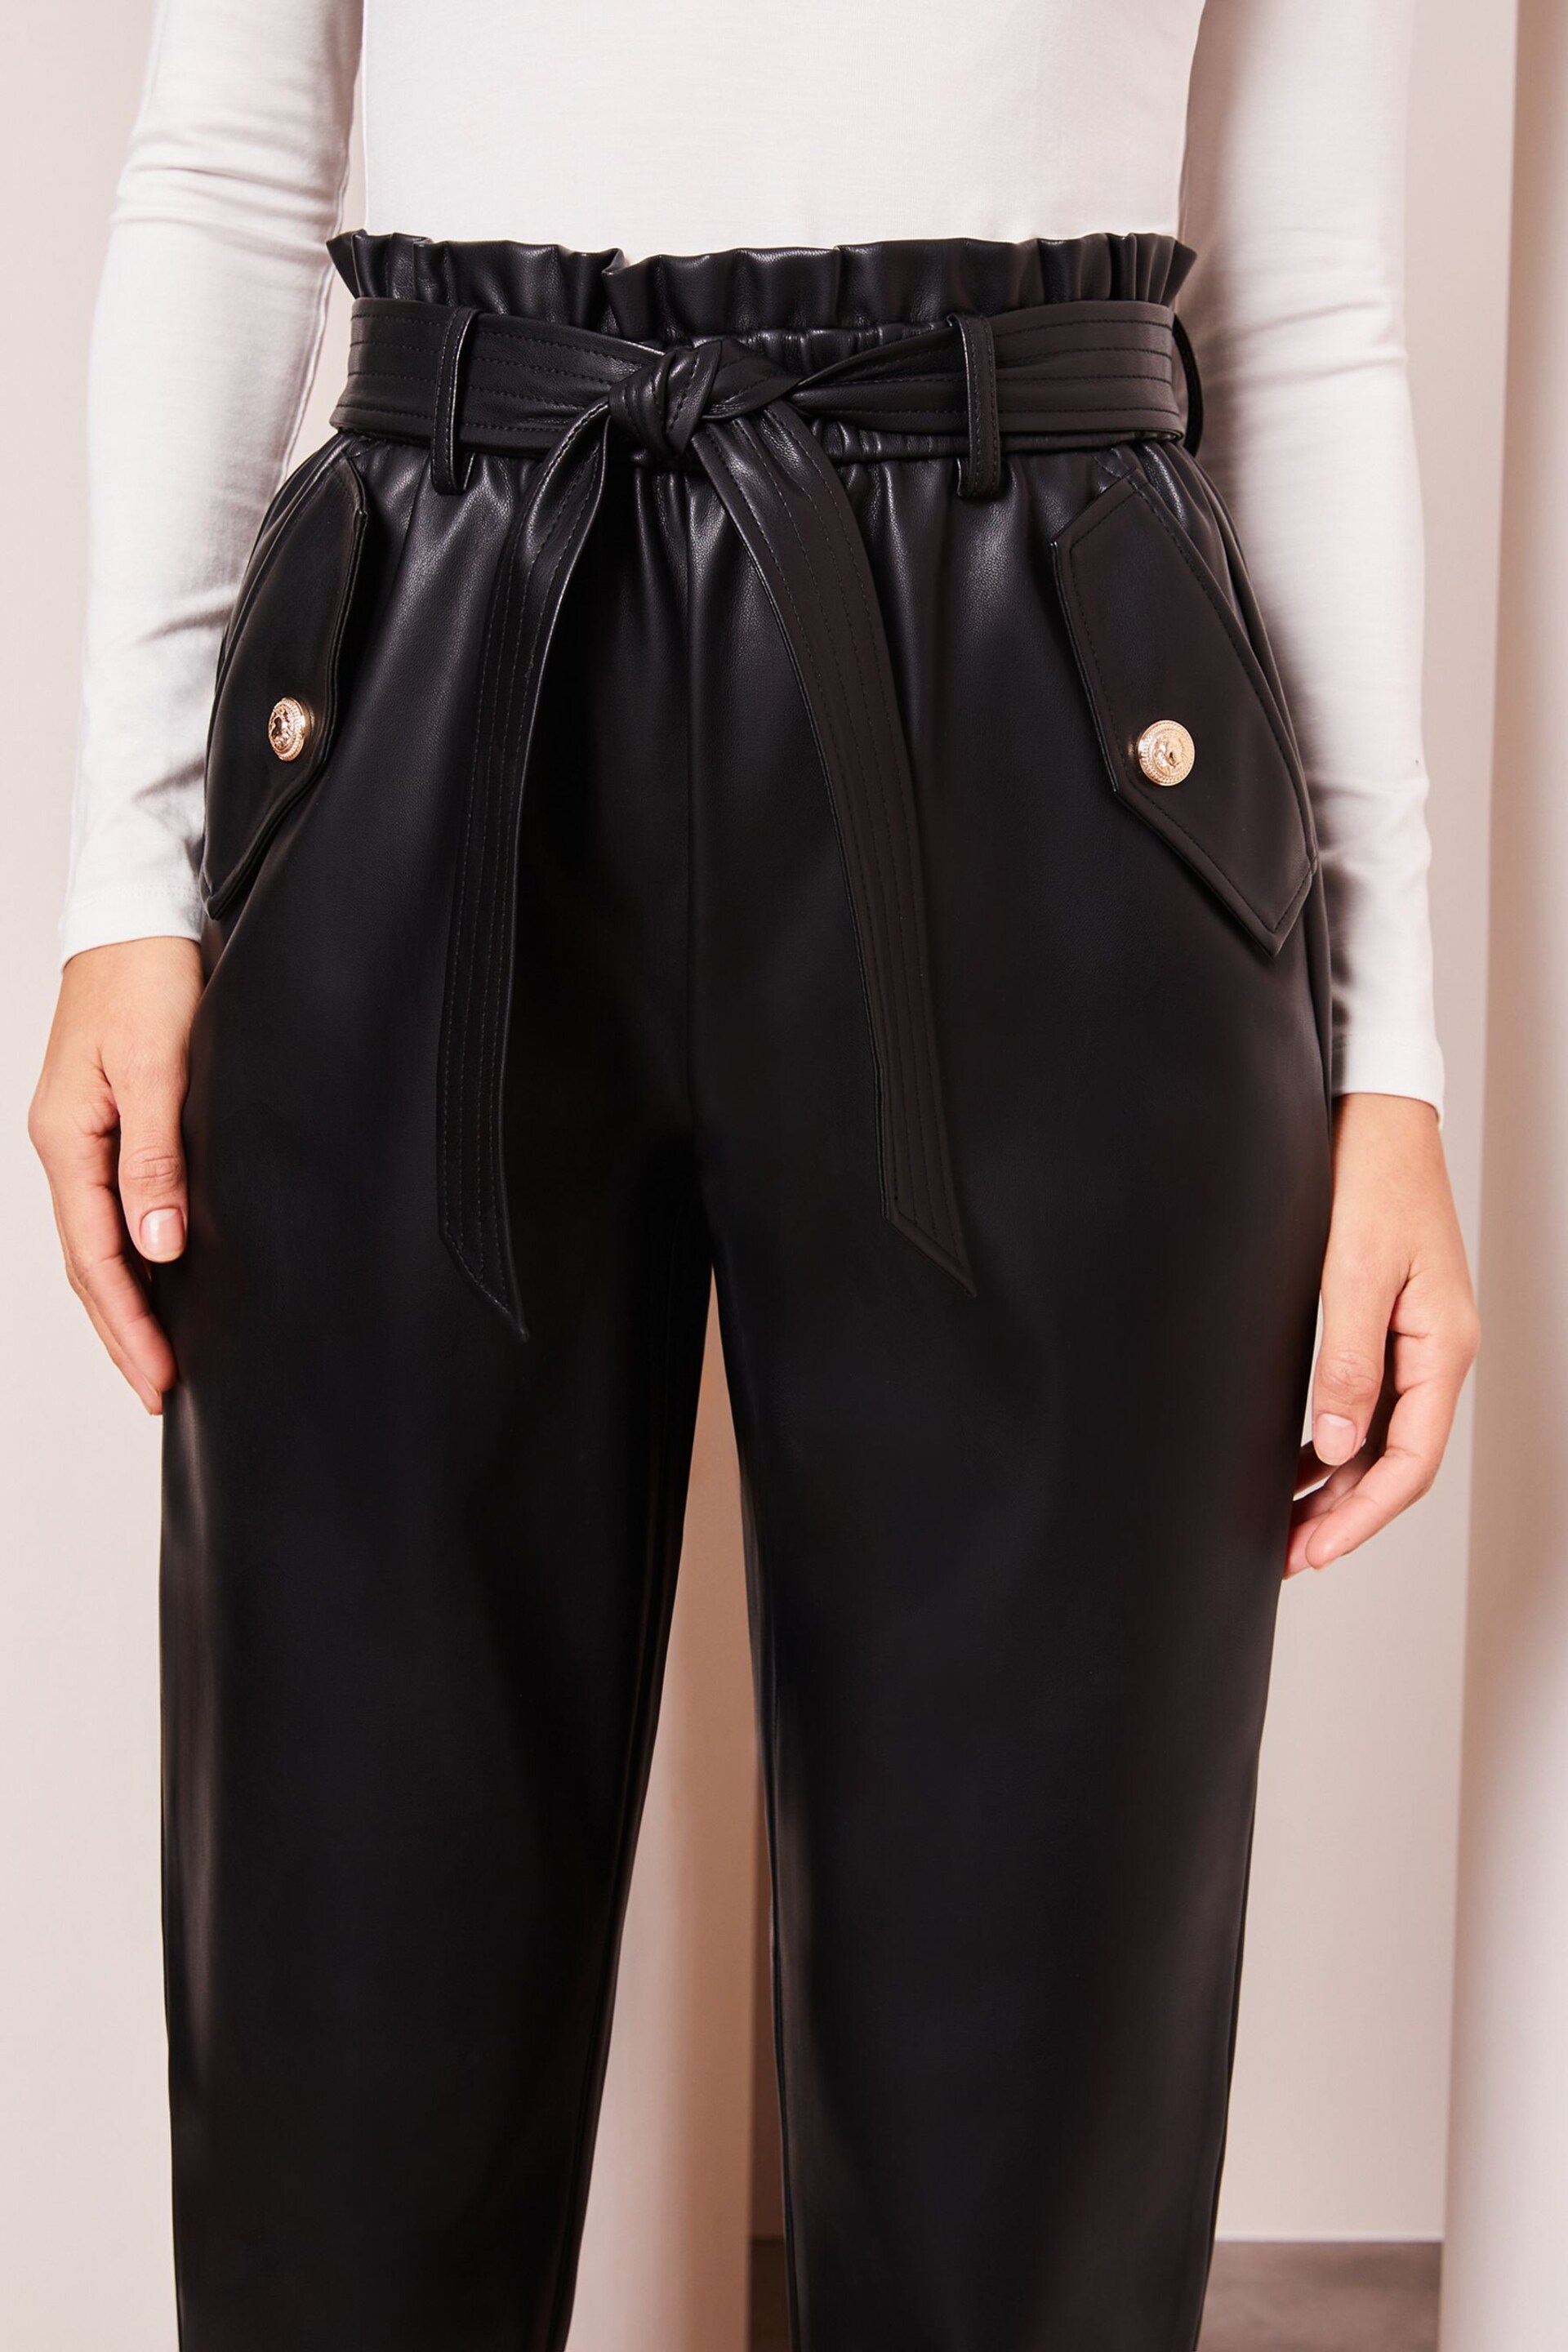 Lipsy Black Faux Leather Military Button Paperbag Trousers - Image 4 of 4